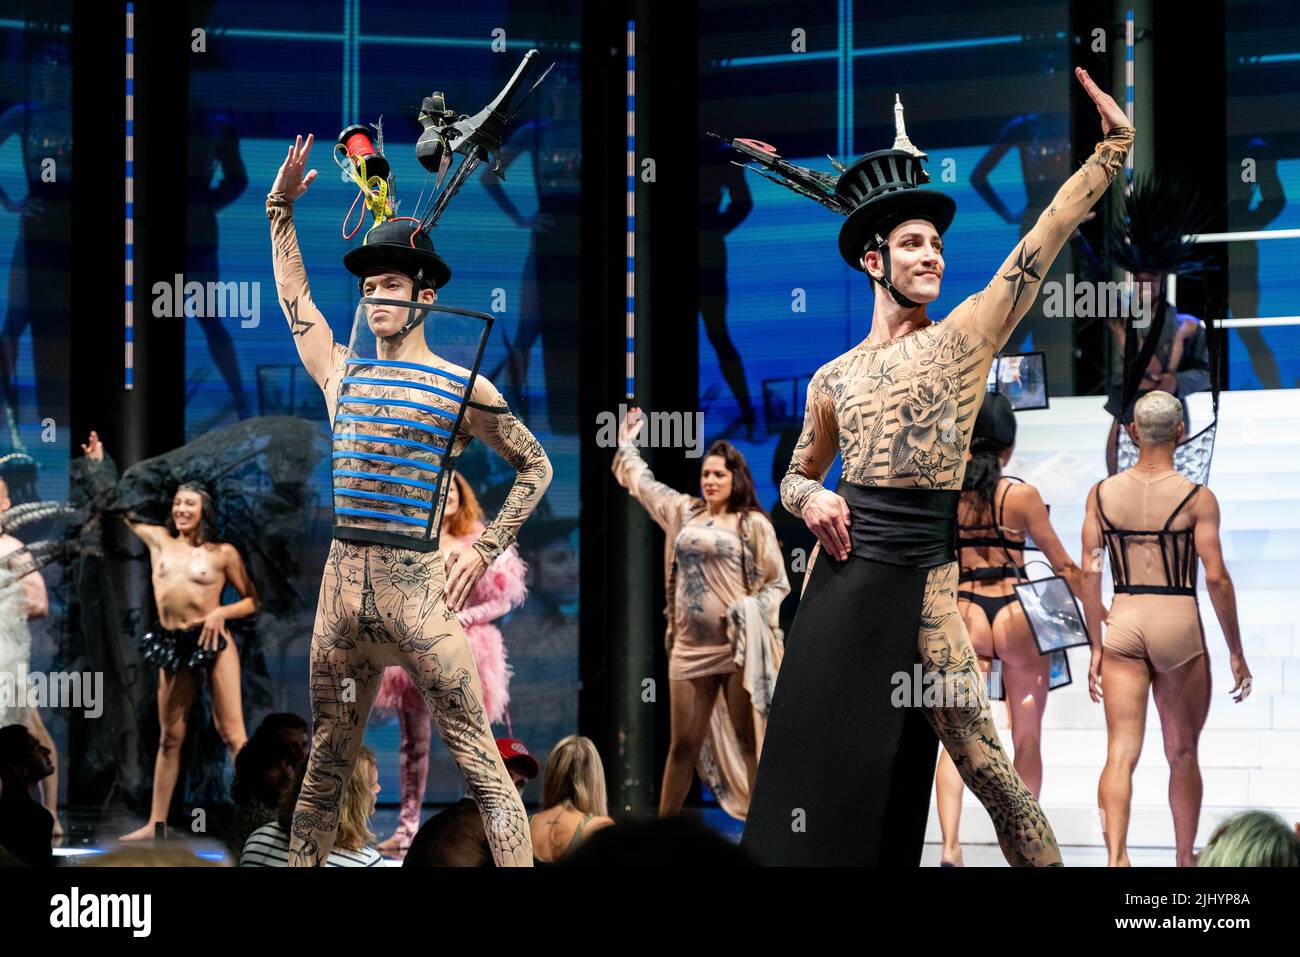 Cast on stage at the curtain call on press night of 'Jean Paul Gaultier's  Fashion Freak Show' The Roundhouse Camden London. 'Jean Paul Gaultier's  Fashion Freak Show' has taken up residence at